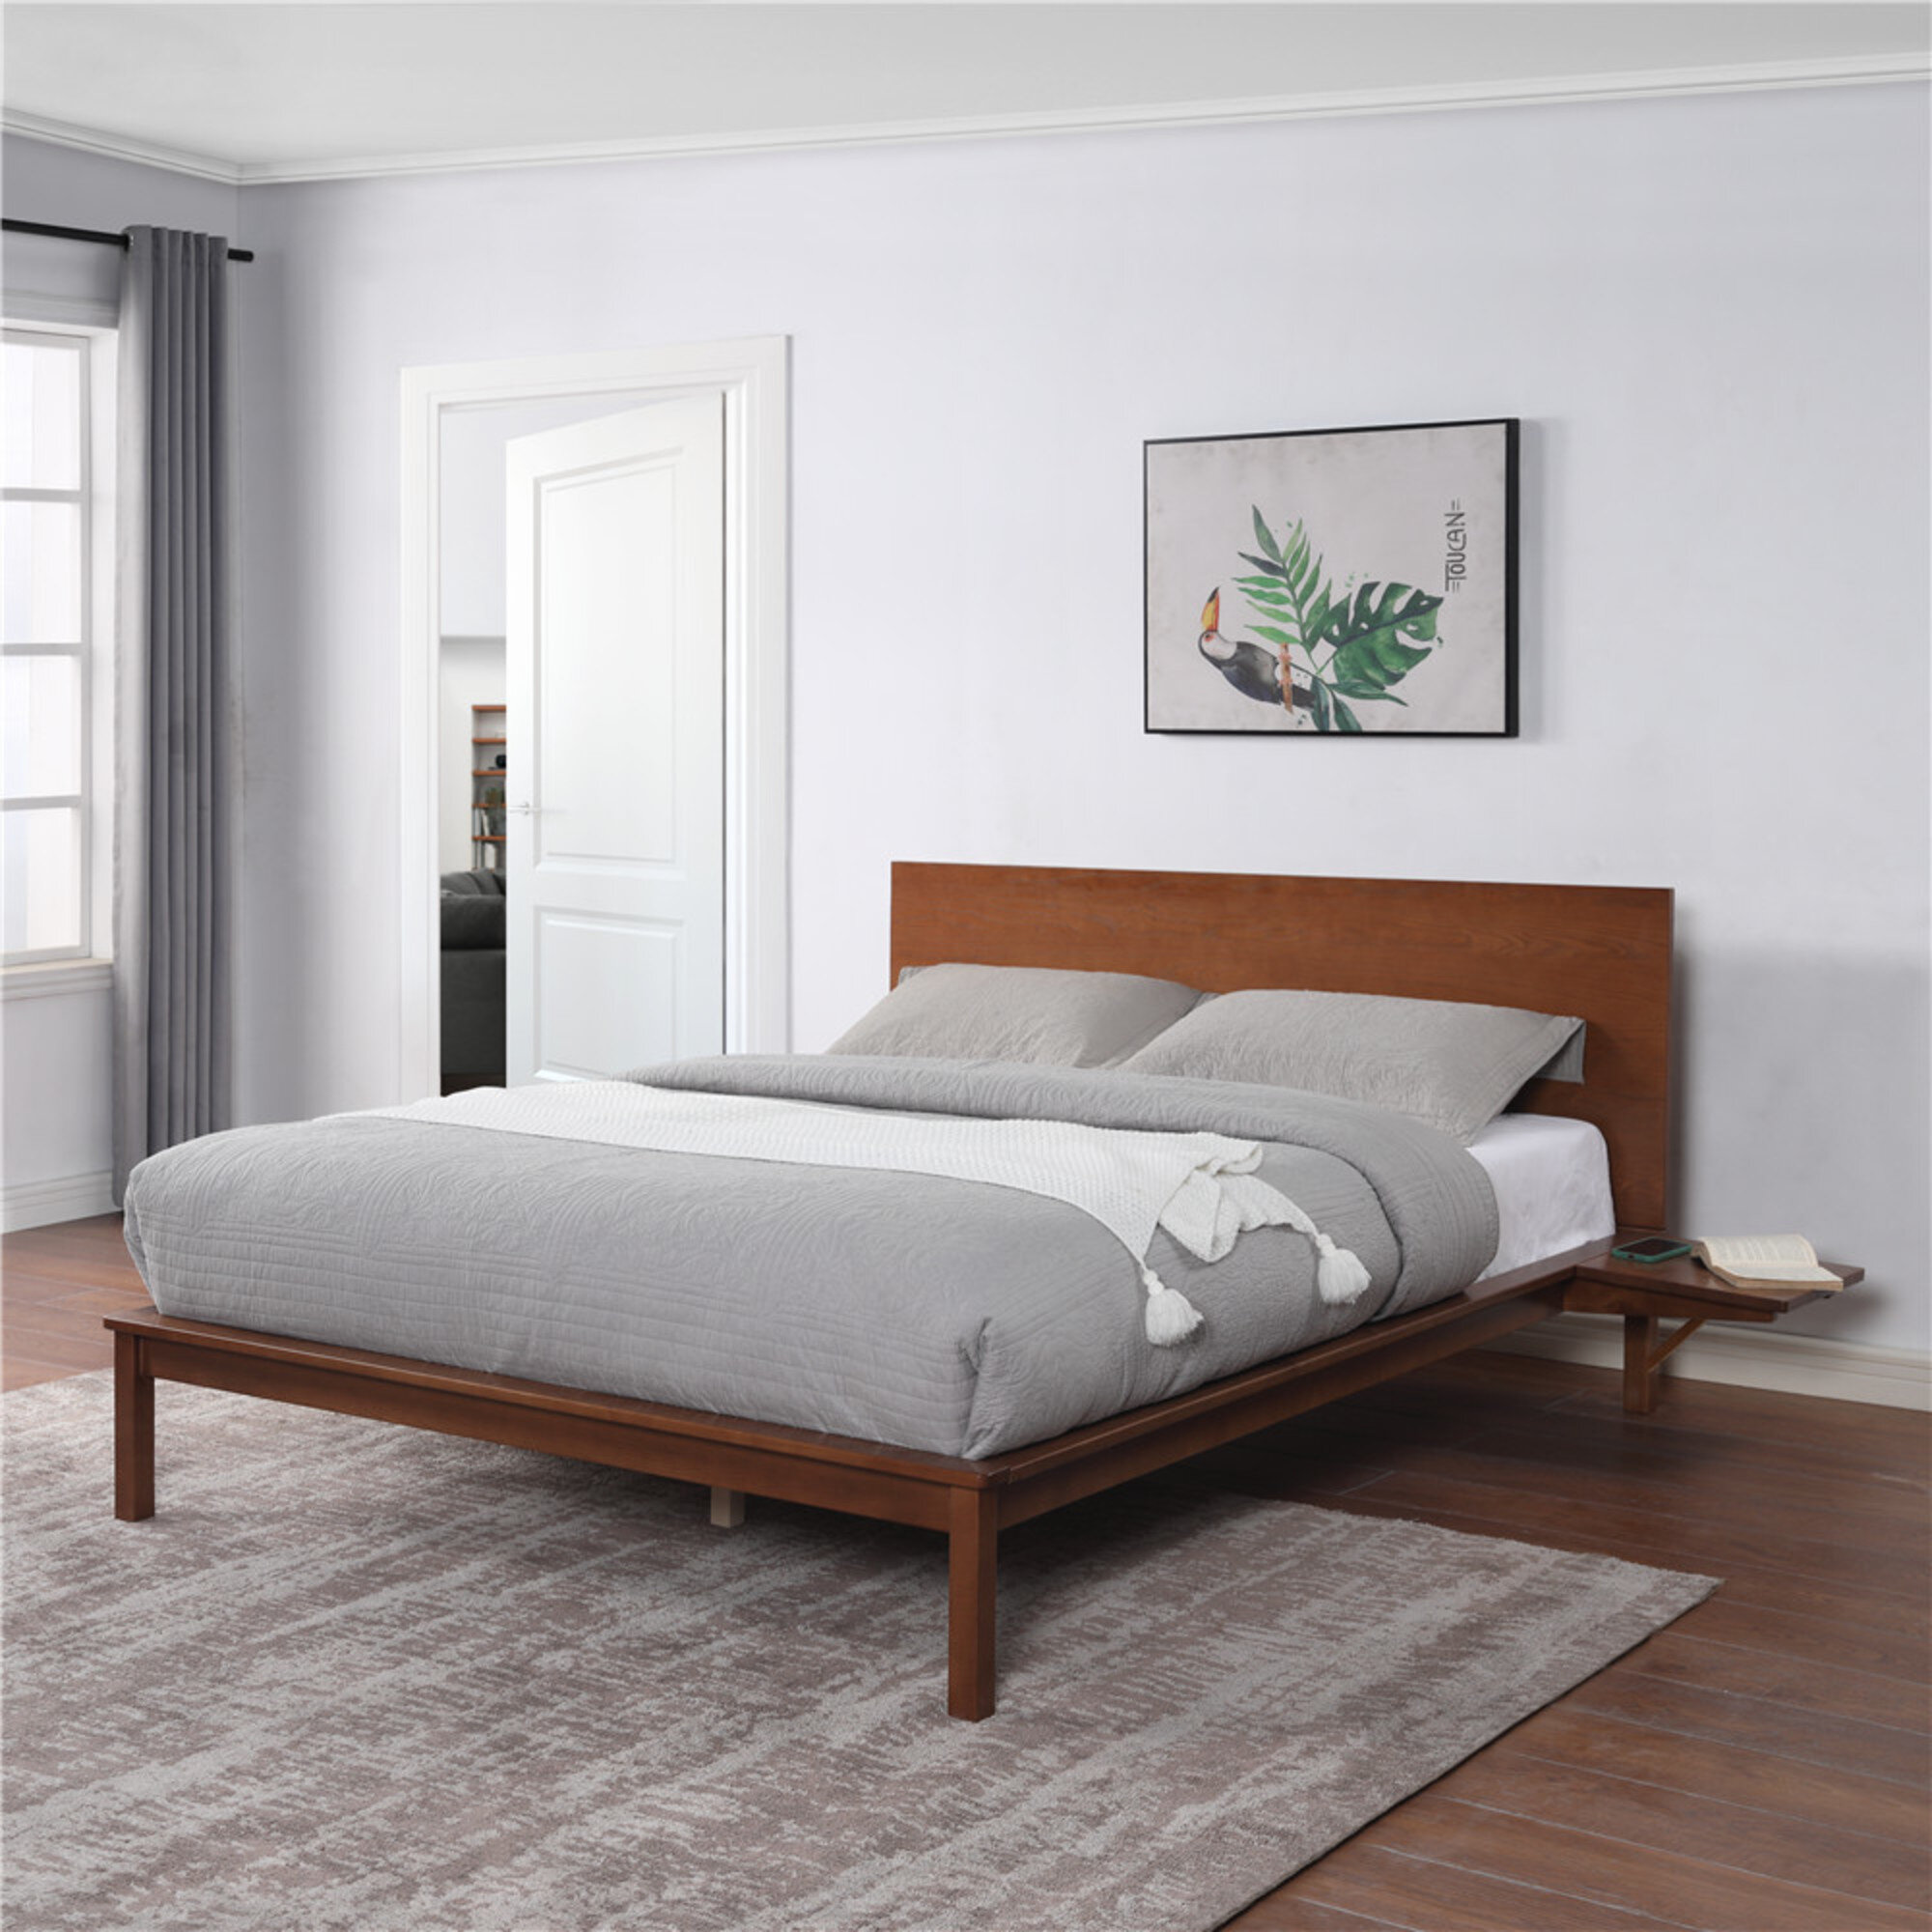 Classic Brands Northfield Wood Platform Bed With Side Table Trays Walnut Finish Queen Wayfair